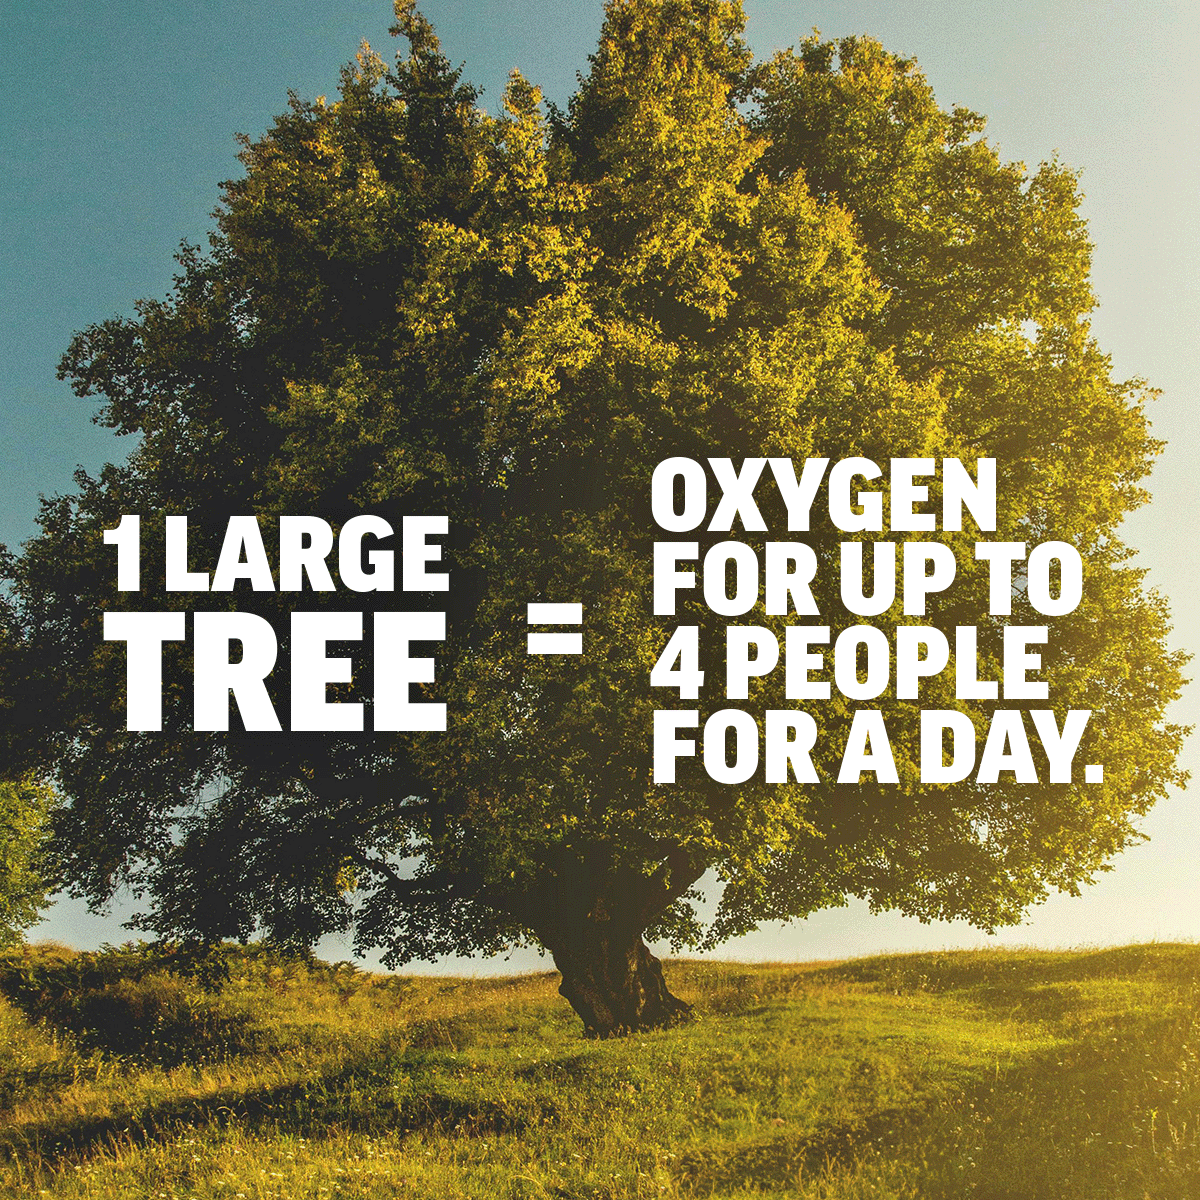 DYK: 1 mature tree produces a day’s supply of oxygen for up to 4 people 💪 Every tree is hard at work removing carbon from the air and turning it into oxygen. And since most living things need oxygen to grow and thrive, having lots of trees on the planet is kind of a big deal.